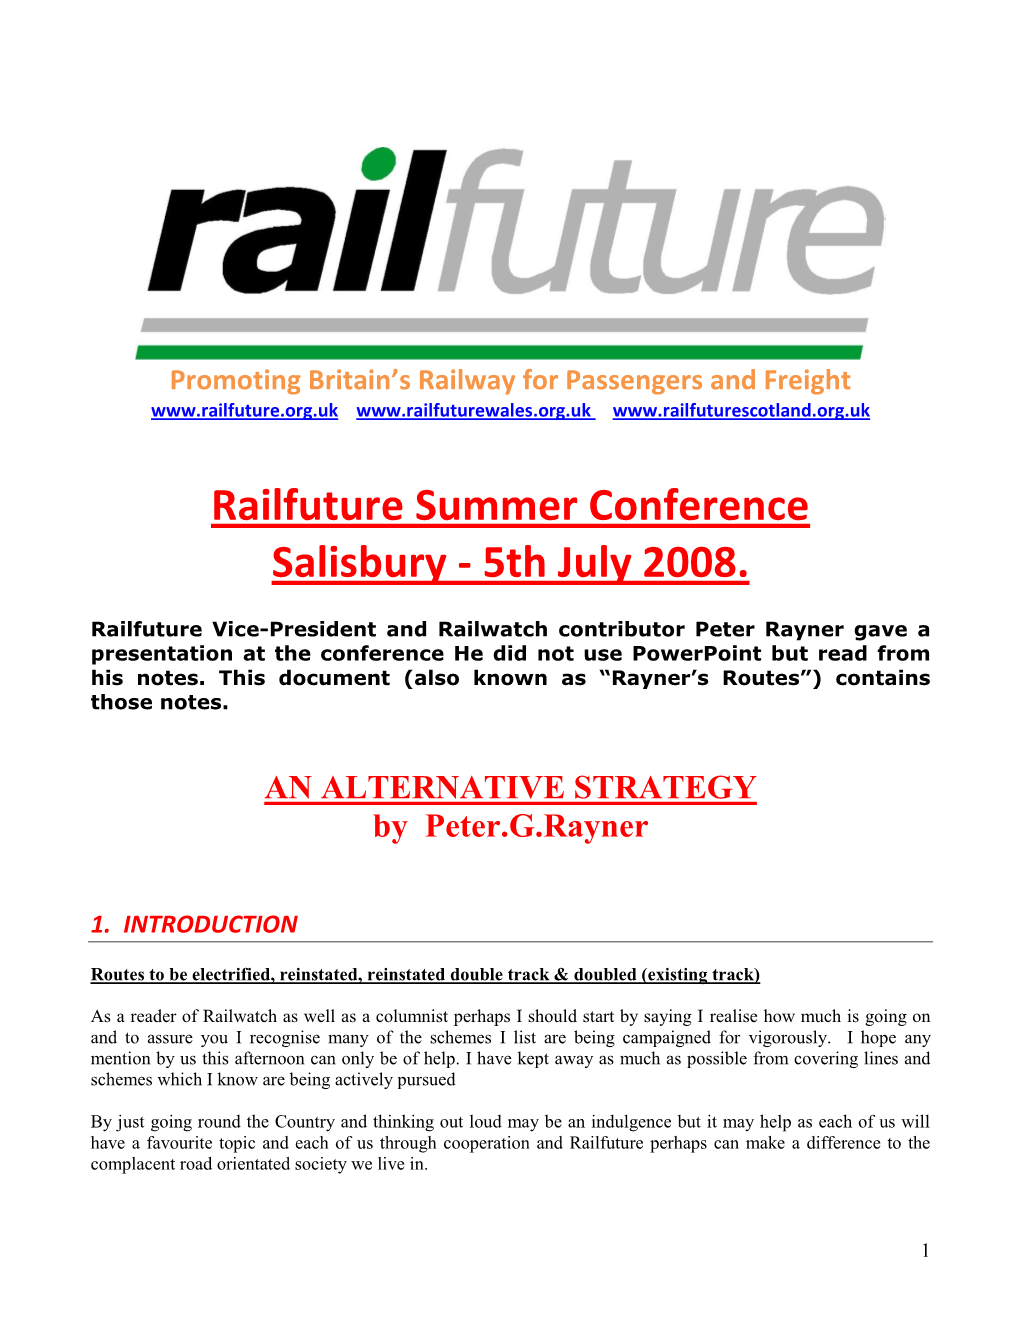 Railfuture Summer Conference 5Th July 2008